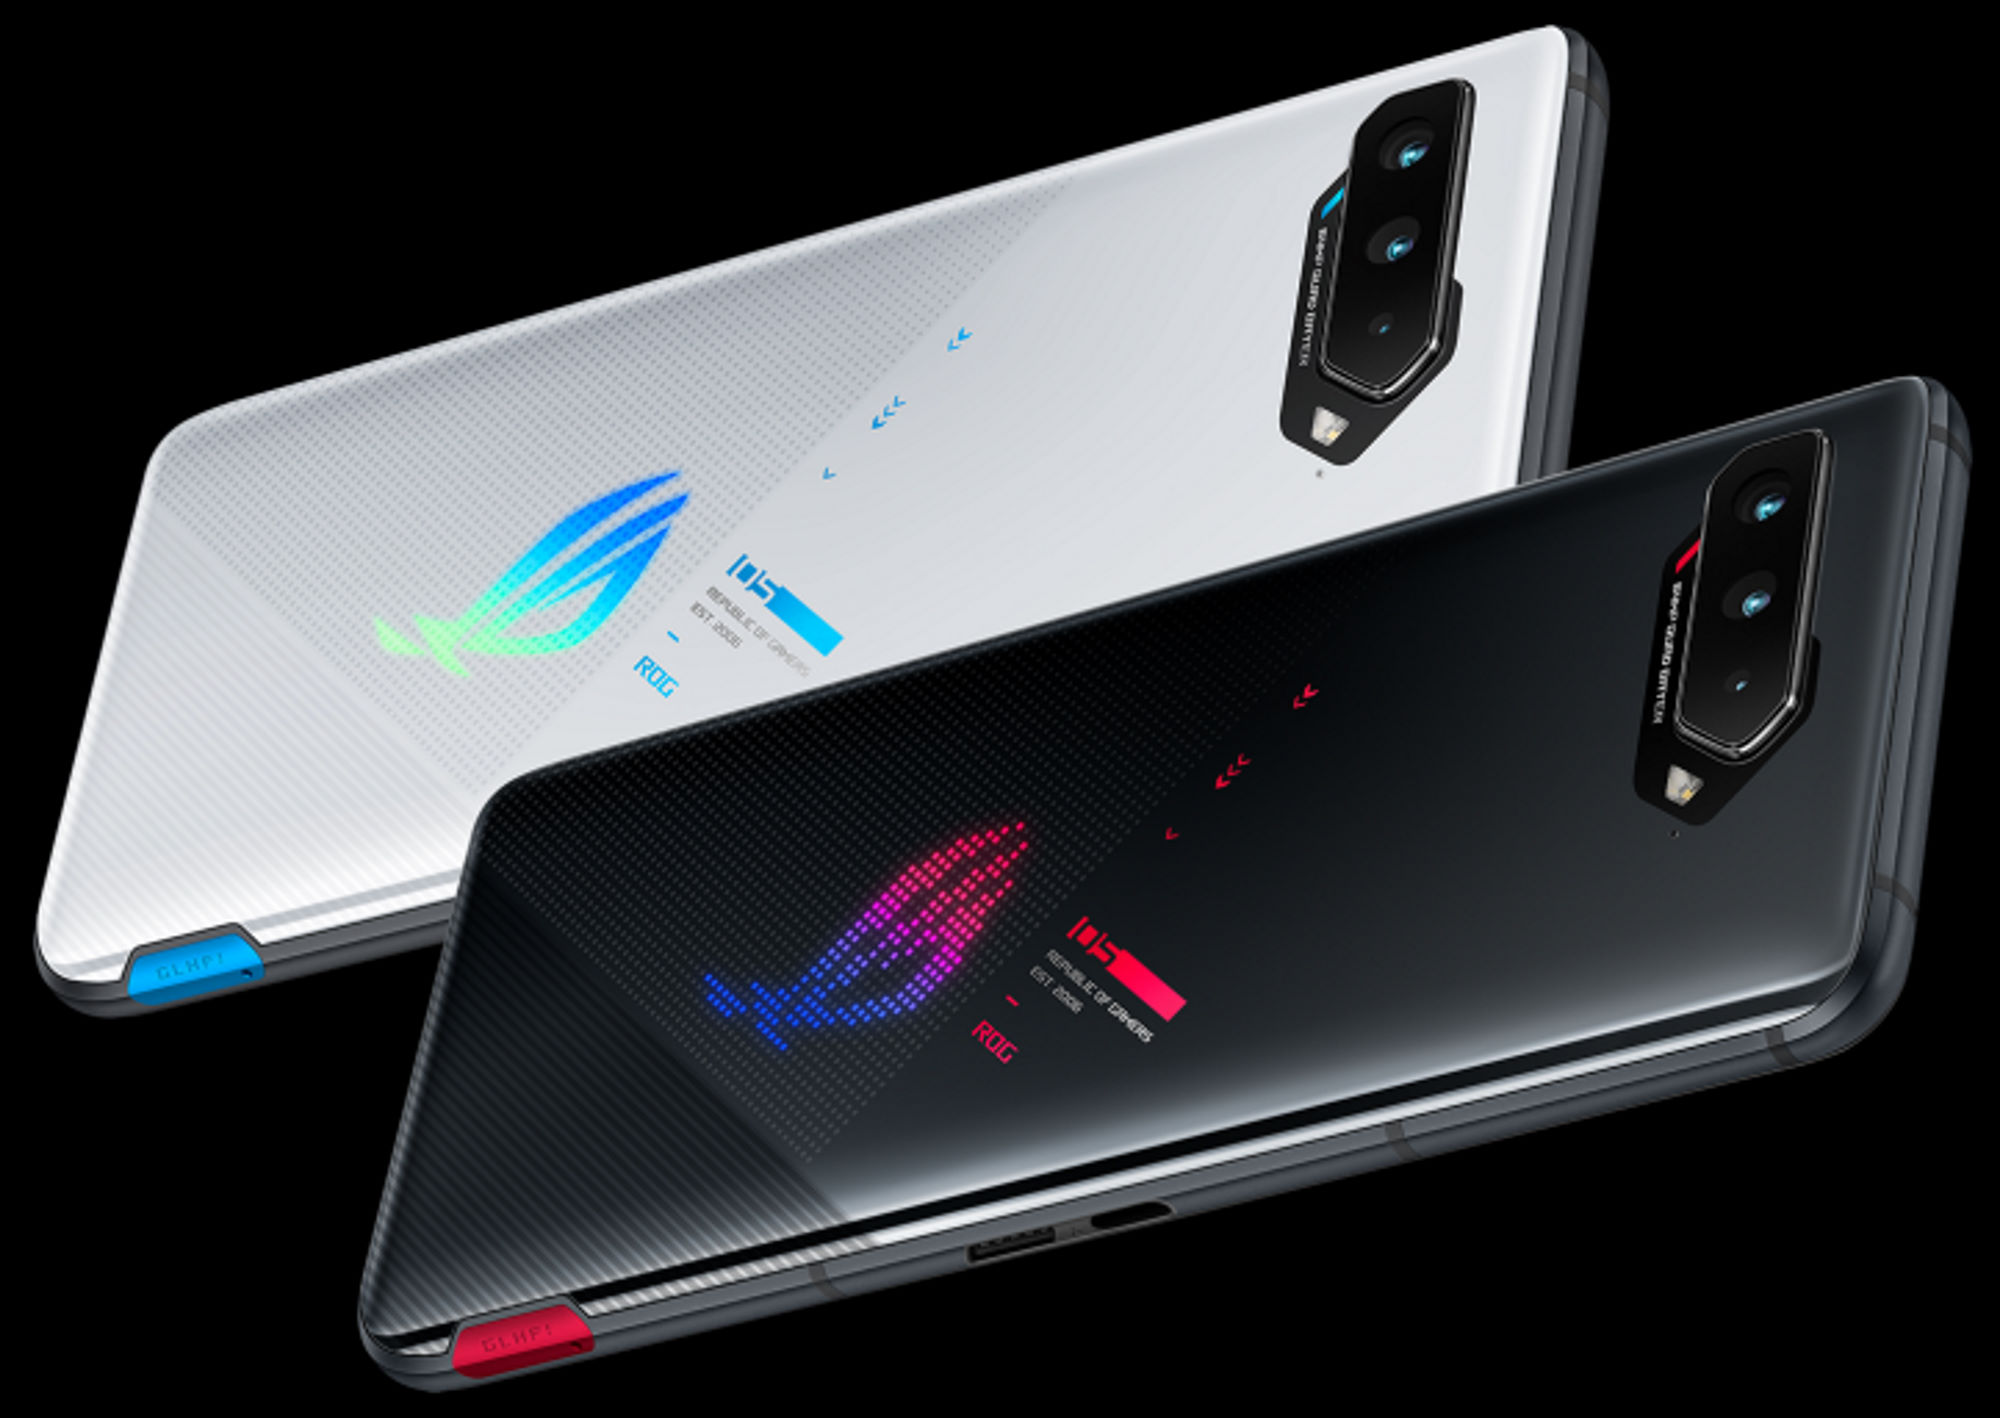 White and black versions of the ROG Phone 5, with emphasis on the rear.